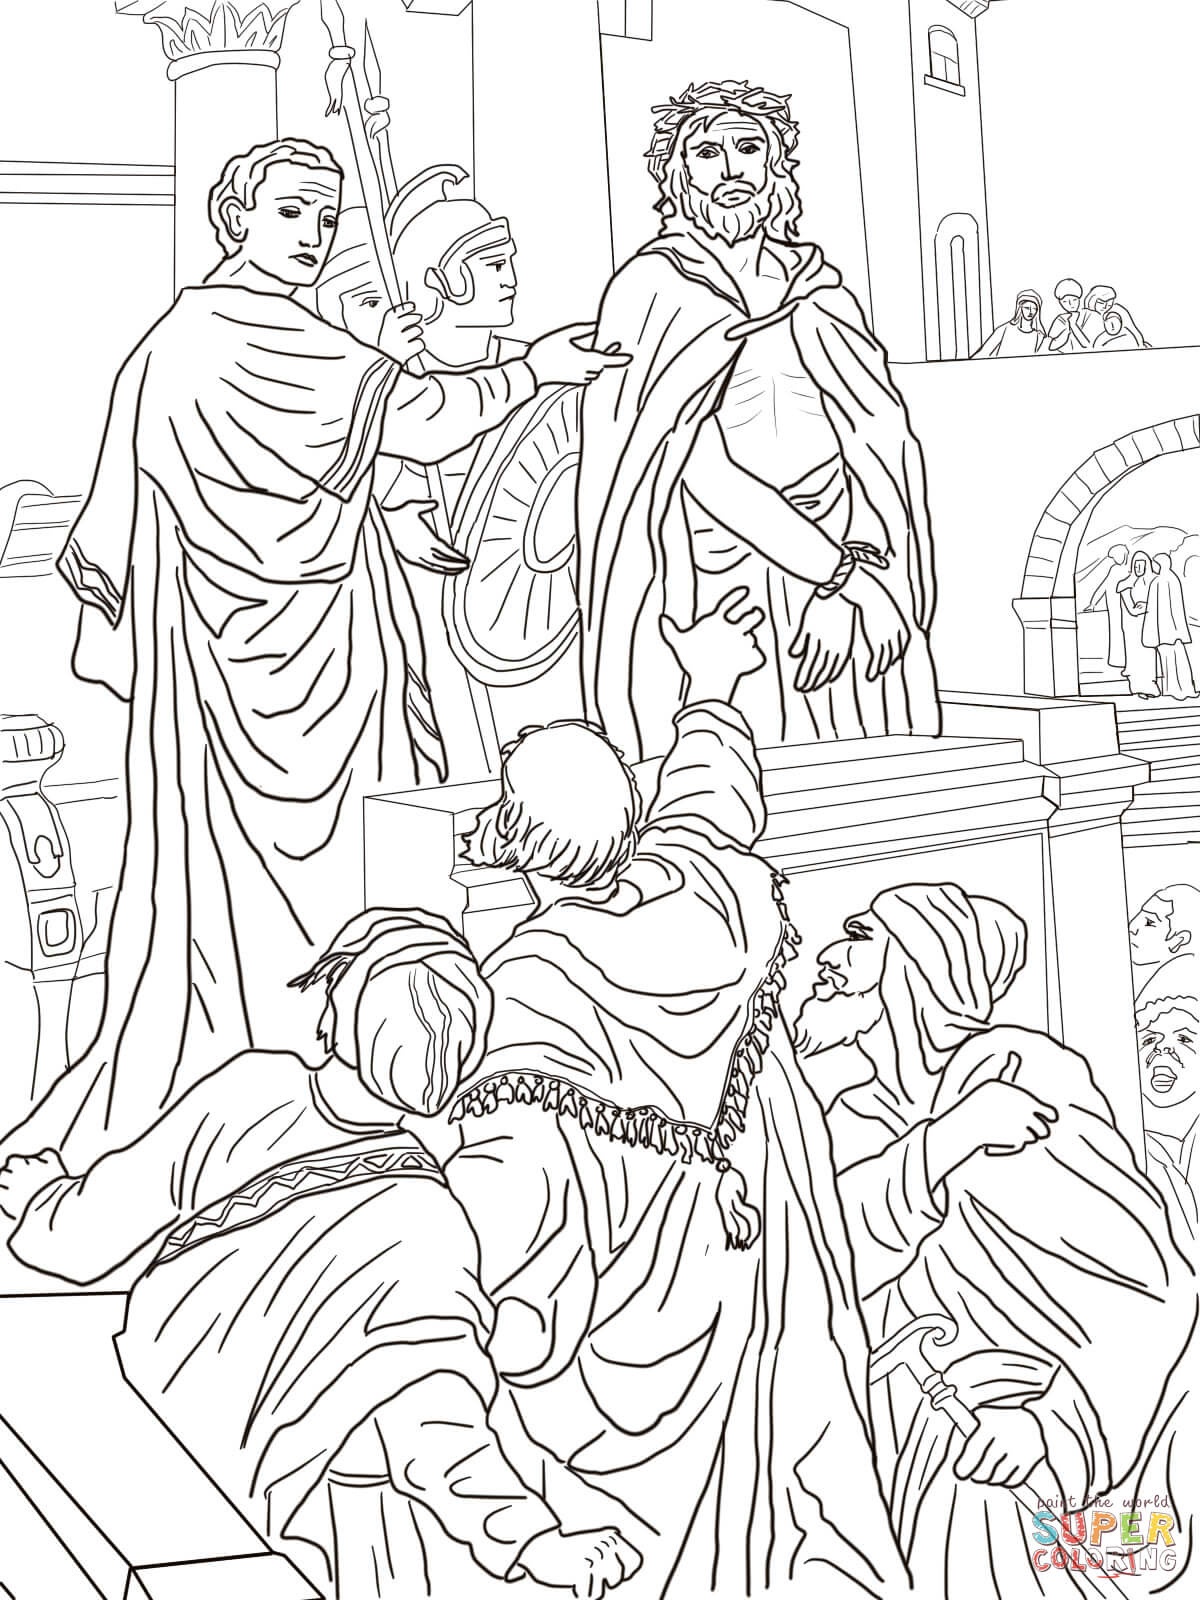 Good Friday Coloring Pages | Free Coloring Pages - Free Printable Good Friday Coloring Pages